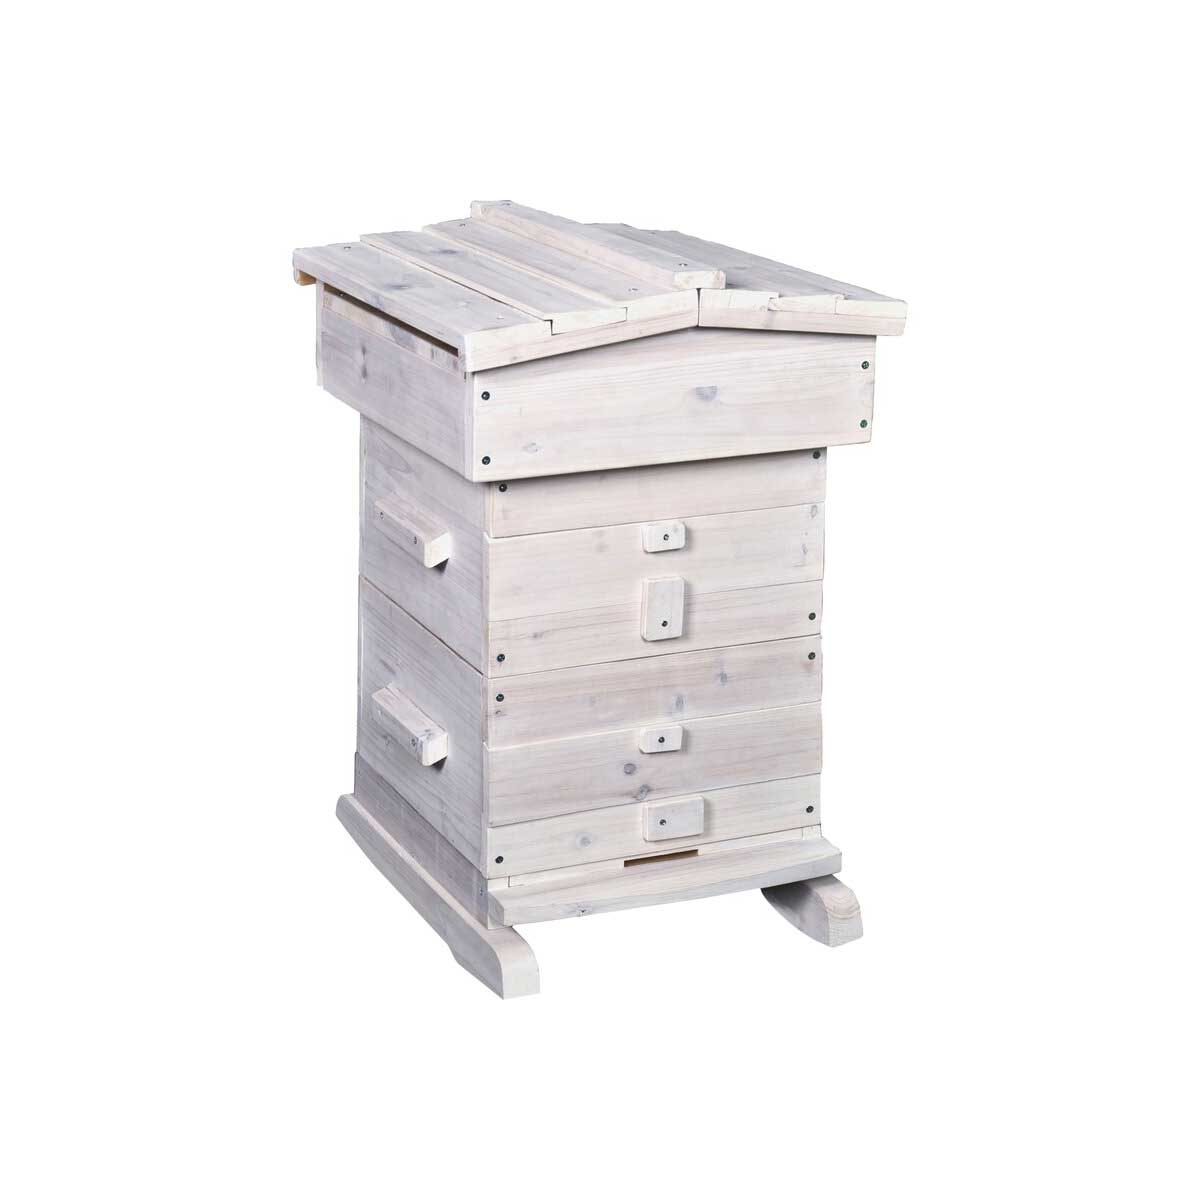 <p>Ideal for <a href="https://www.familyhandyman.com/list/14-backyard-beekeeping-tips/">beginning beekeepers</a>, the <a href="https://www.wayfair.com/outdoor/pdp/ware-manufacturing-home-harvest-hive-wfg1699.html?piid=" rel="noopener noreferrer">Ware Manufacturing Home Harvest Hive</a> is designed for housing and raising bees naturally. Easy-to-use, the hive's roof is peaked to shed water and ventilated to control airflow. Painted white with a water-resistant finish, it comes with two medium (number eight) frames, but can accommodate up to 16 (sold separately). It also includes two hive boxes, two viewing windows, 18 top bars, an insulated quilt box, a screened-in base and support legs. And it's easy to assemble!</p> <p>Reviewer Jessica wrote, "Everything I expected! Super easy to assemble. Used a drill and it was together in 30 min[ute]s."</p> <p class="listicle-page__cta-button-shop"><a class="shop-btn" href="https://www.wayfair.com/outdoor/pdp/ware-manufacturing-home-harvest-hive-wfg1699.html?piid=">Shop Now</a></p>